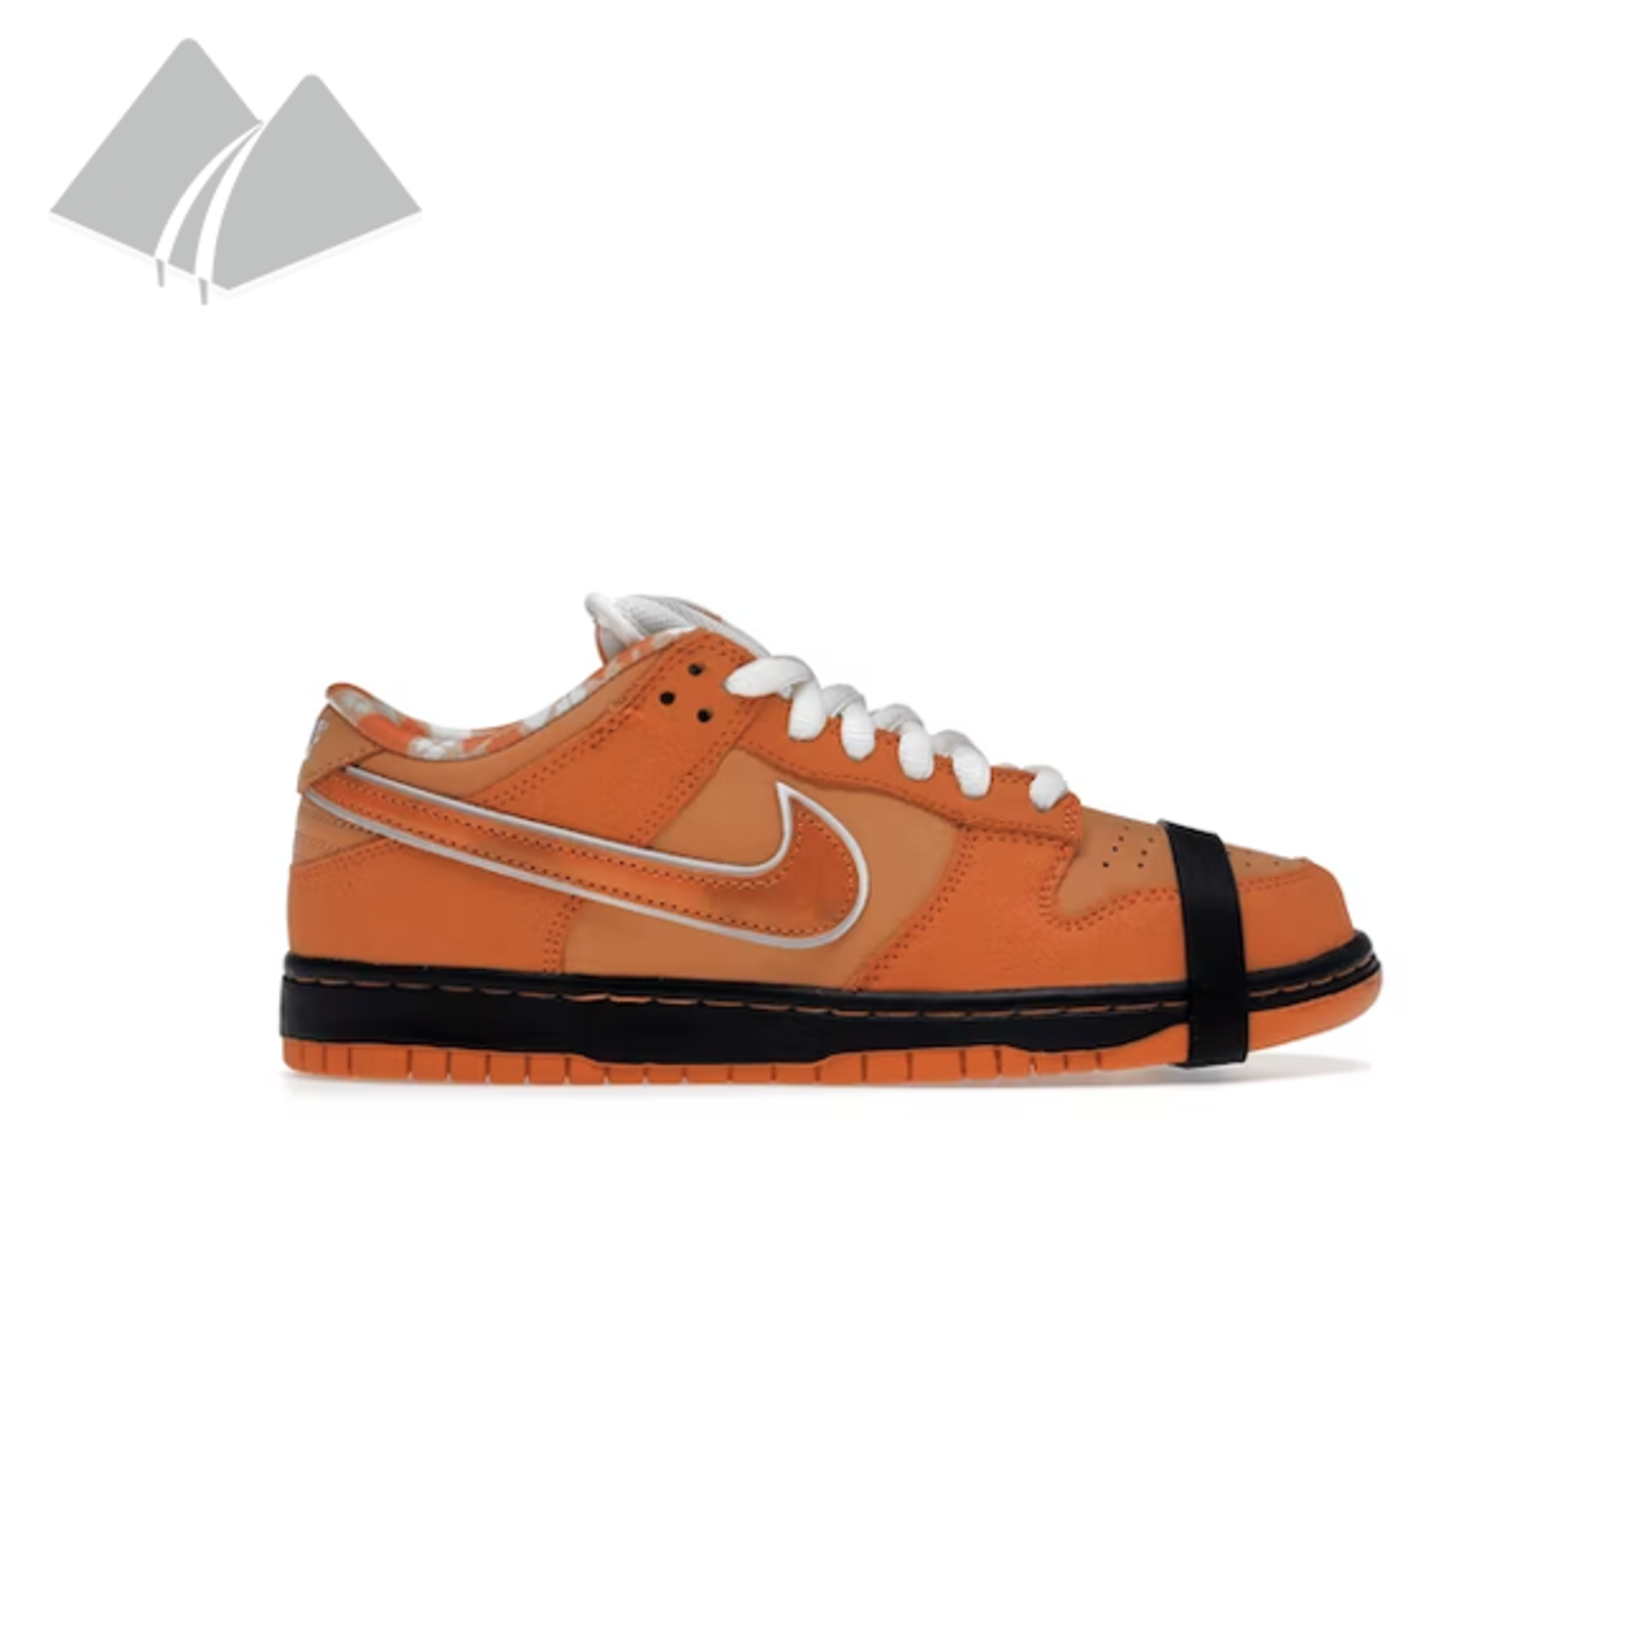 Nike Nike SB Dunk Low (M) Concepts Orange Lobster - The Valley